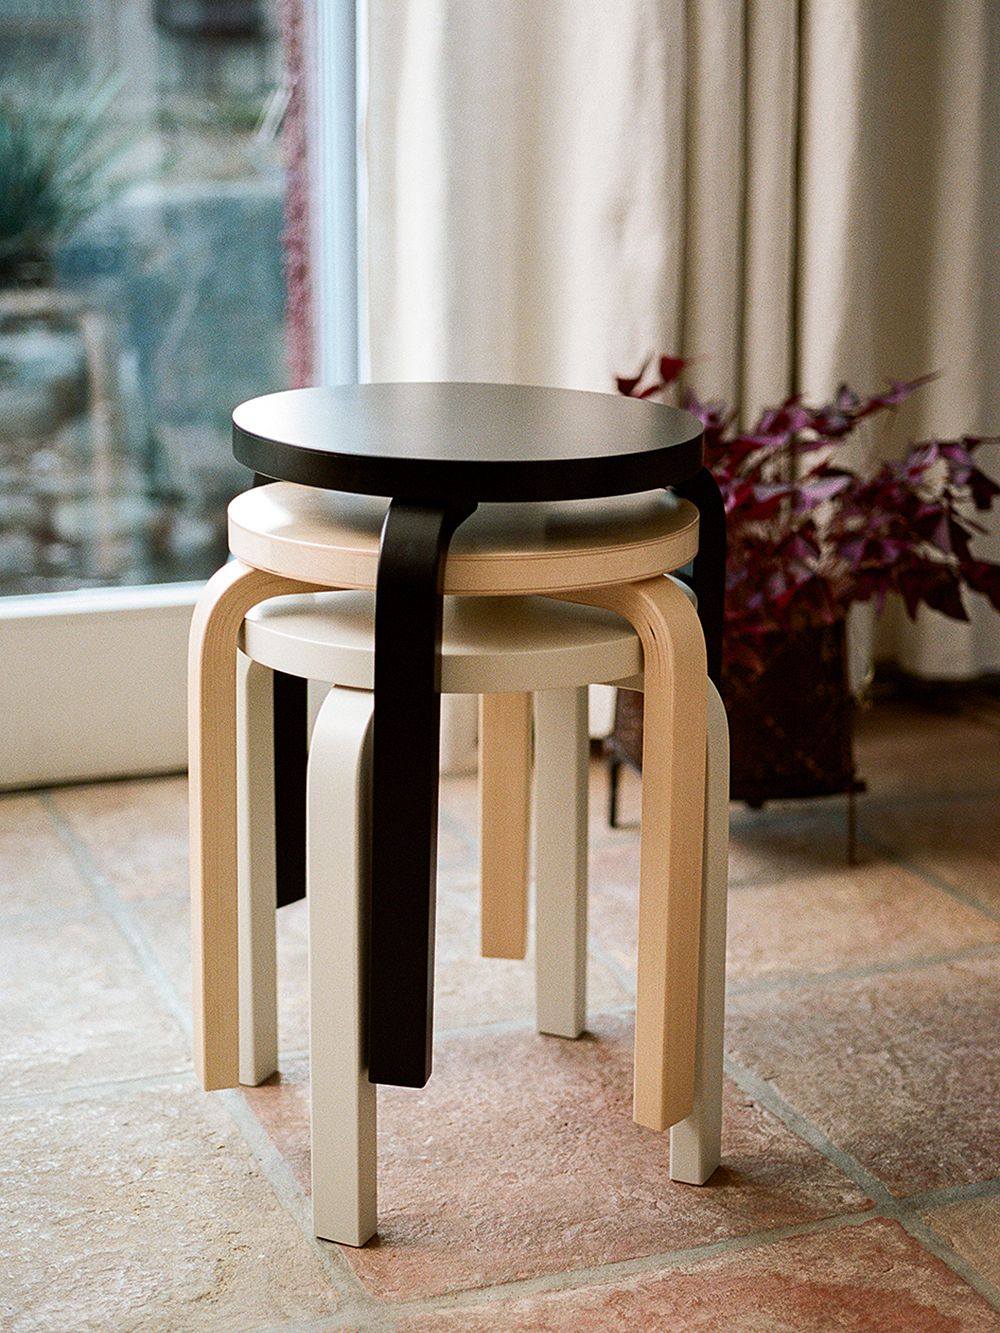 Pile of Aalto Stools in black, white and birch